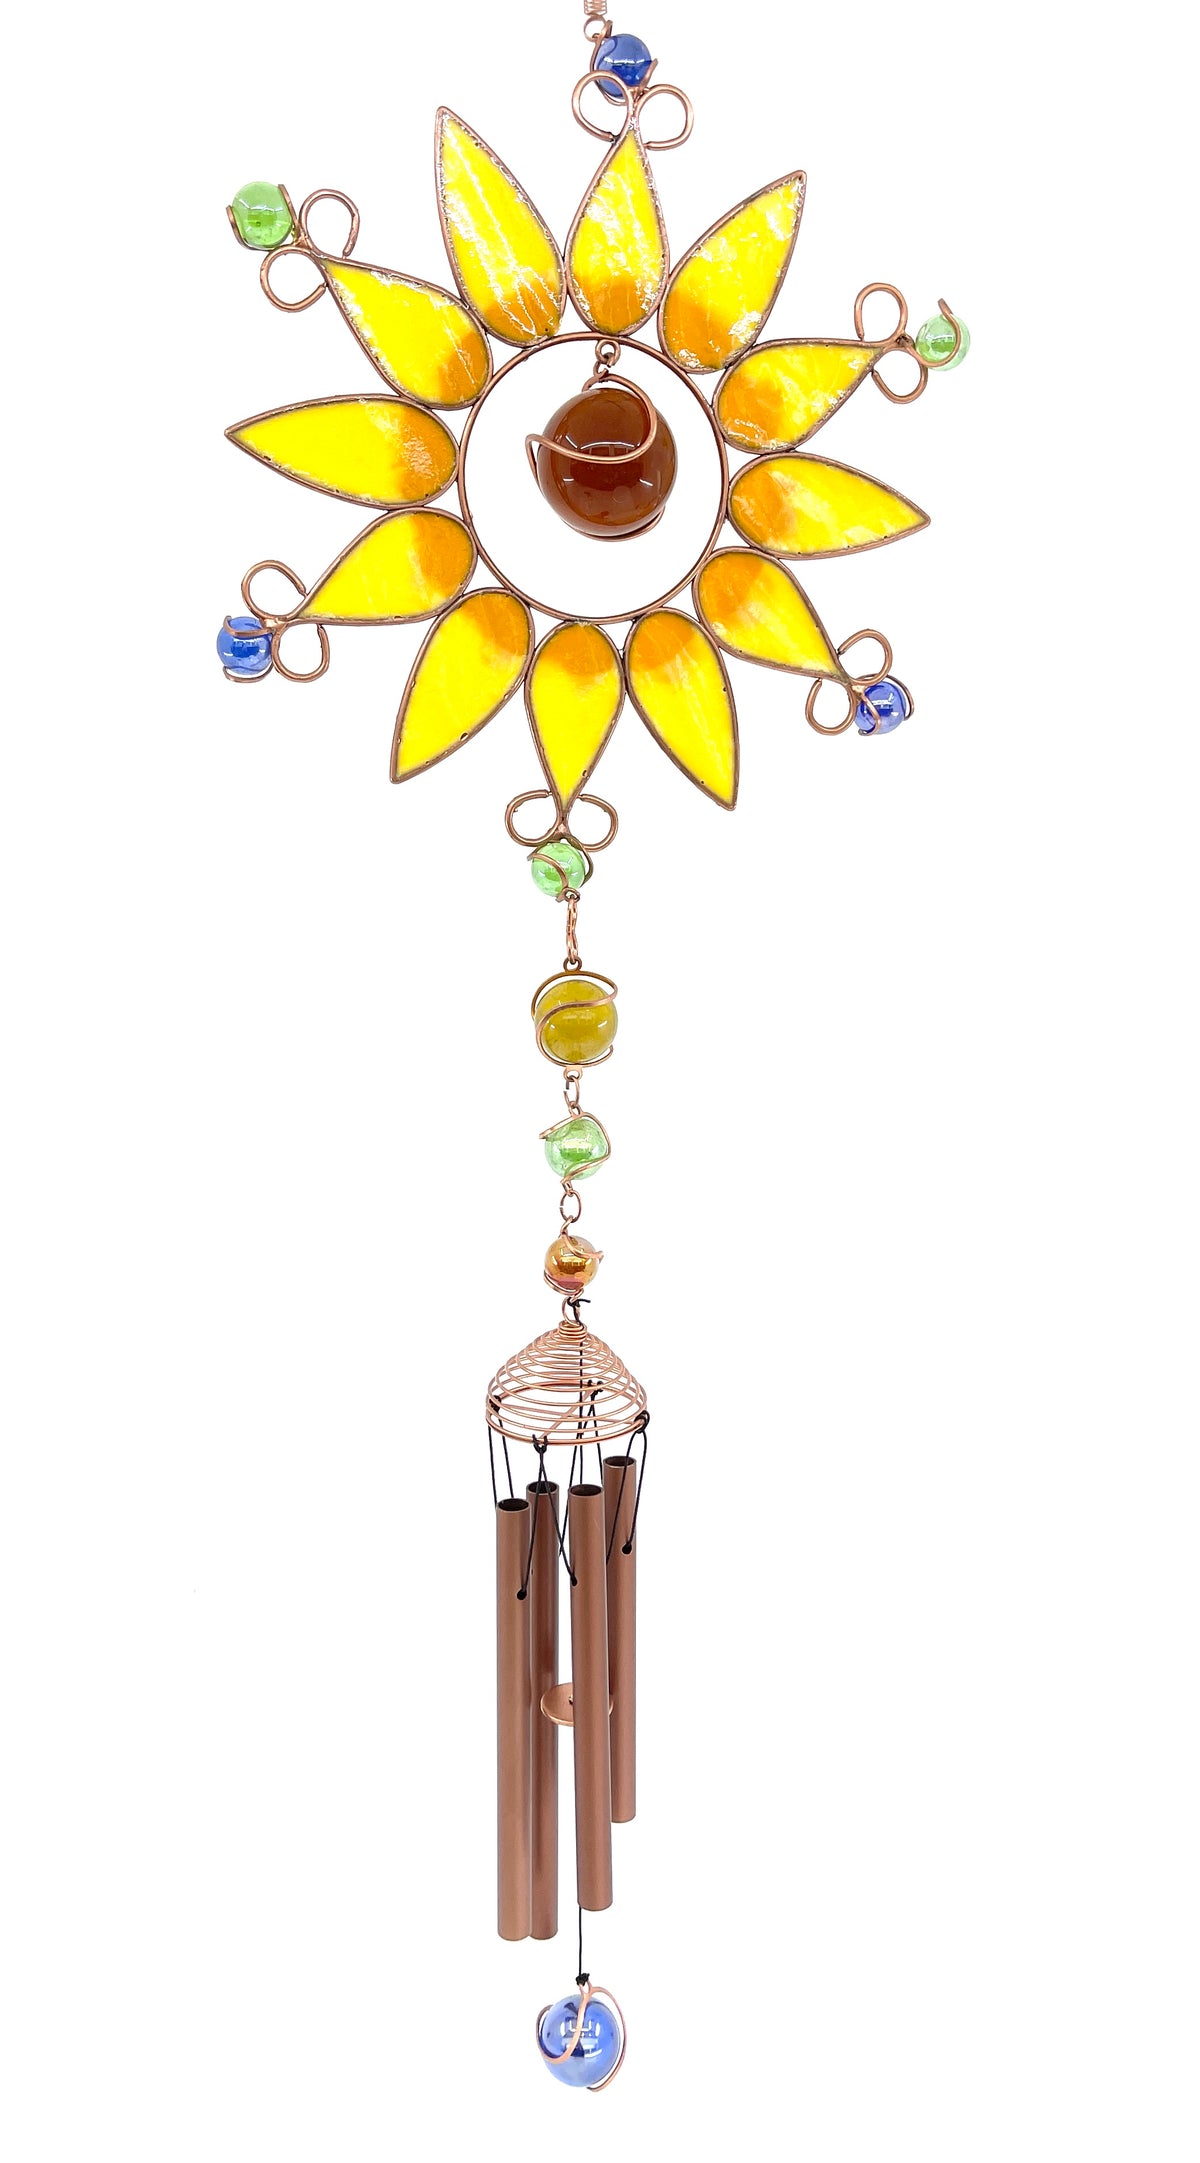 Copper Windchimes Sunflower Design with Glass Beads